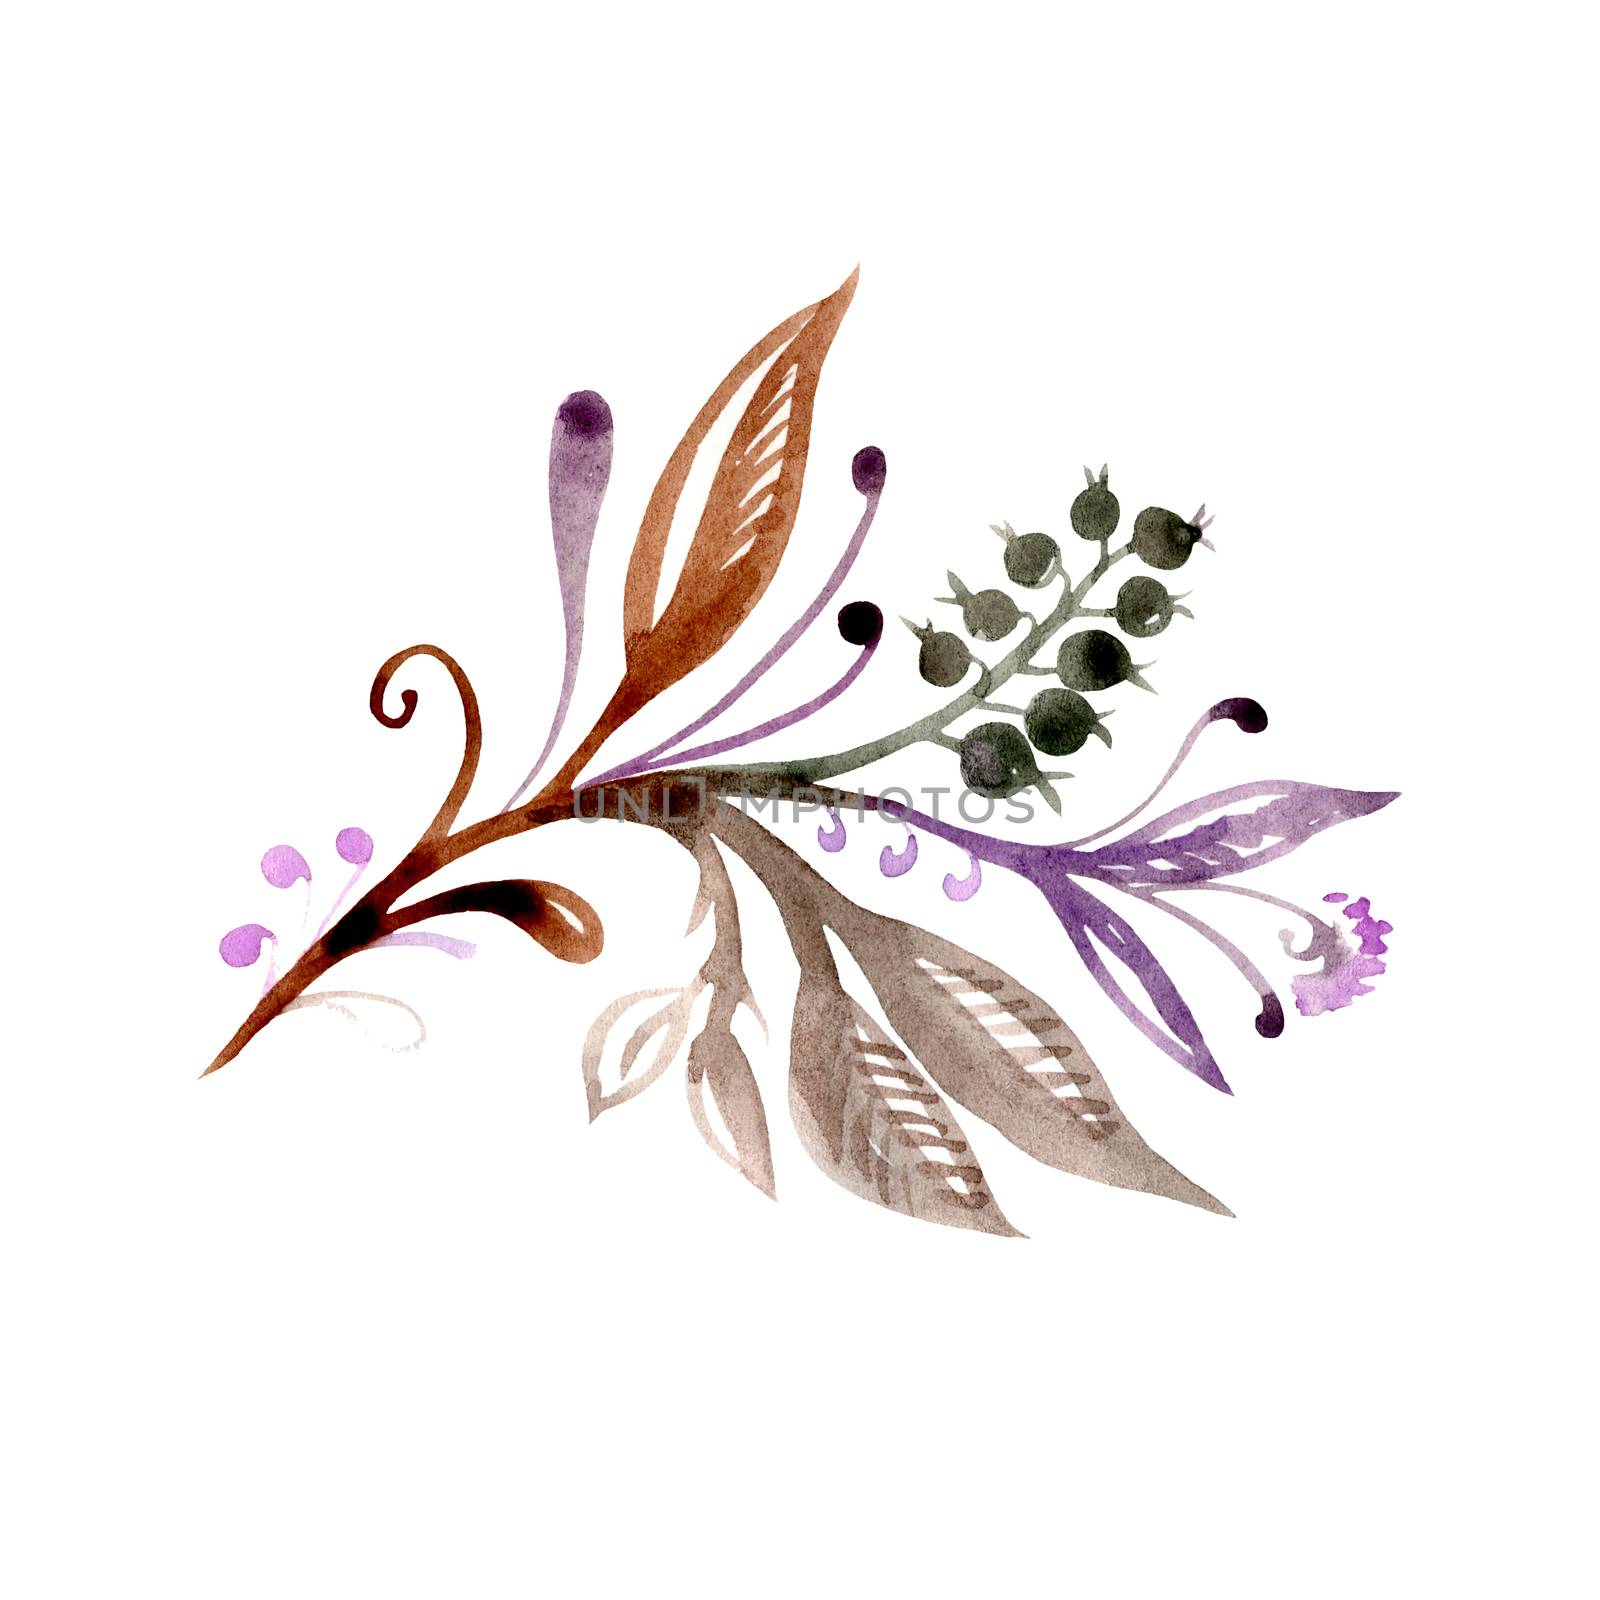 Watercolor flower twig with leaves and berries in brown, green and purple colors by LanaLeta